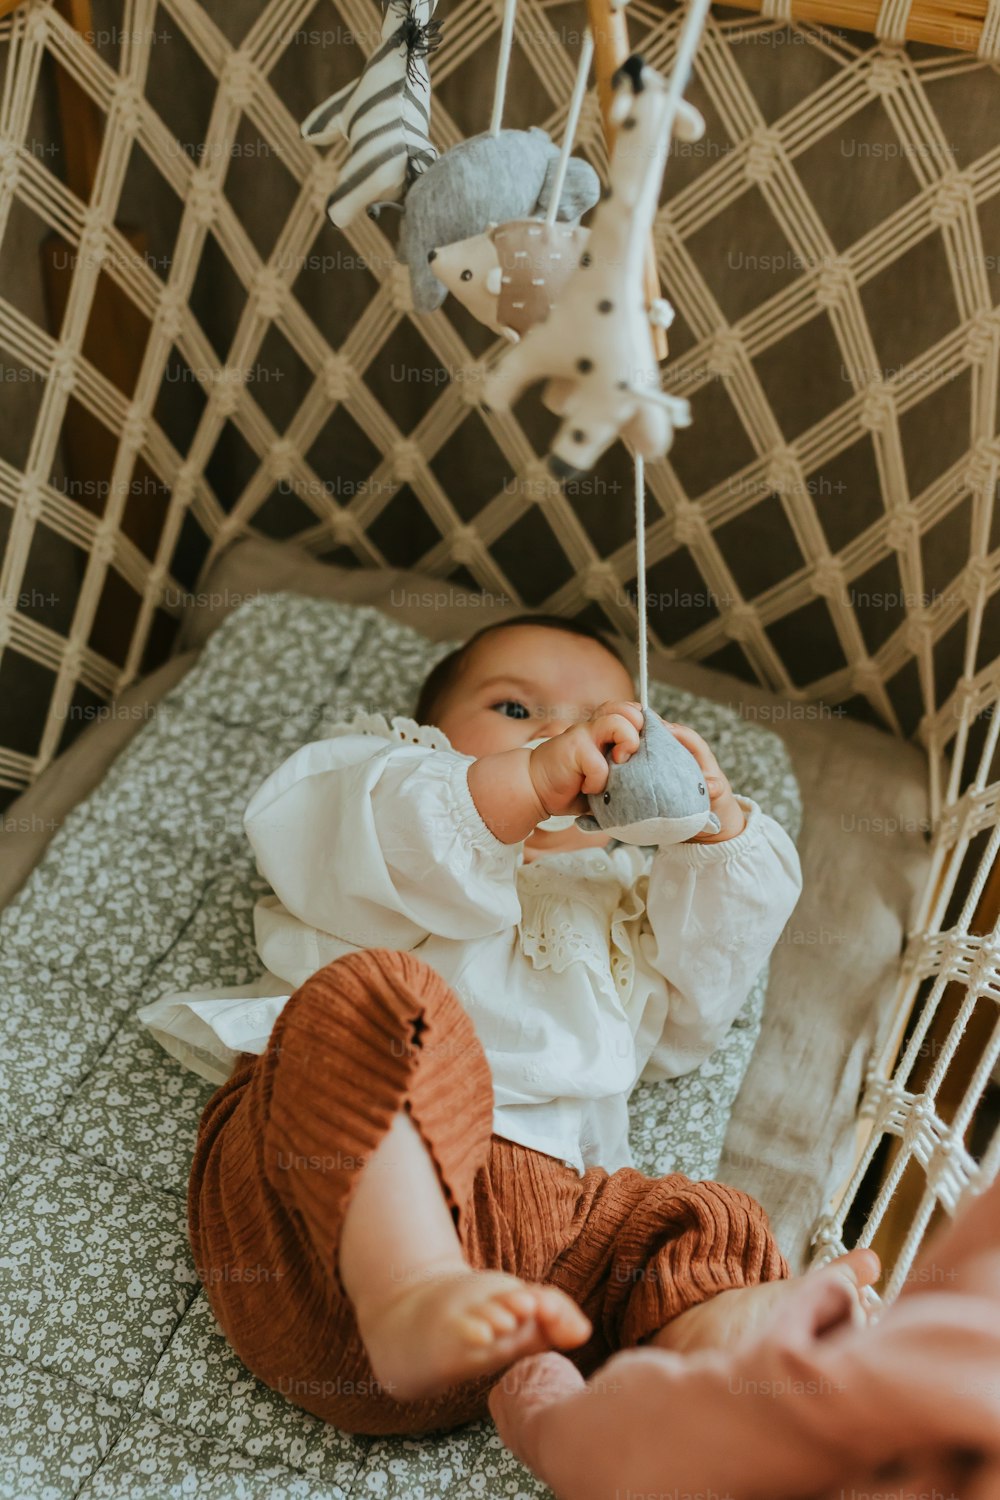 a baby in a crib playing with a toy